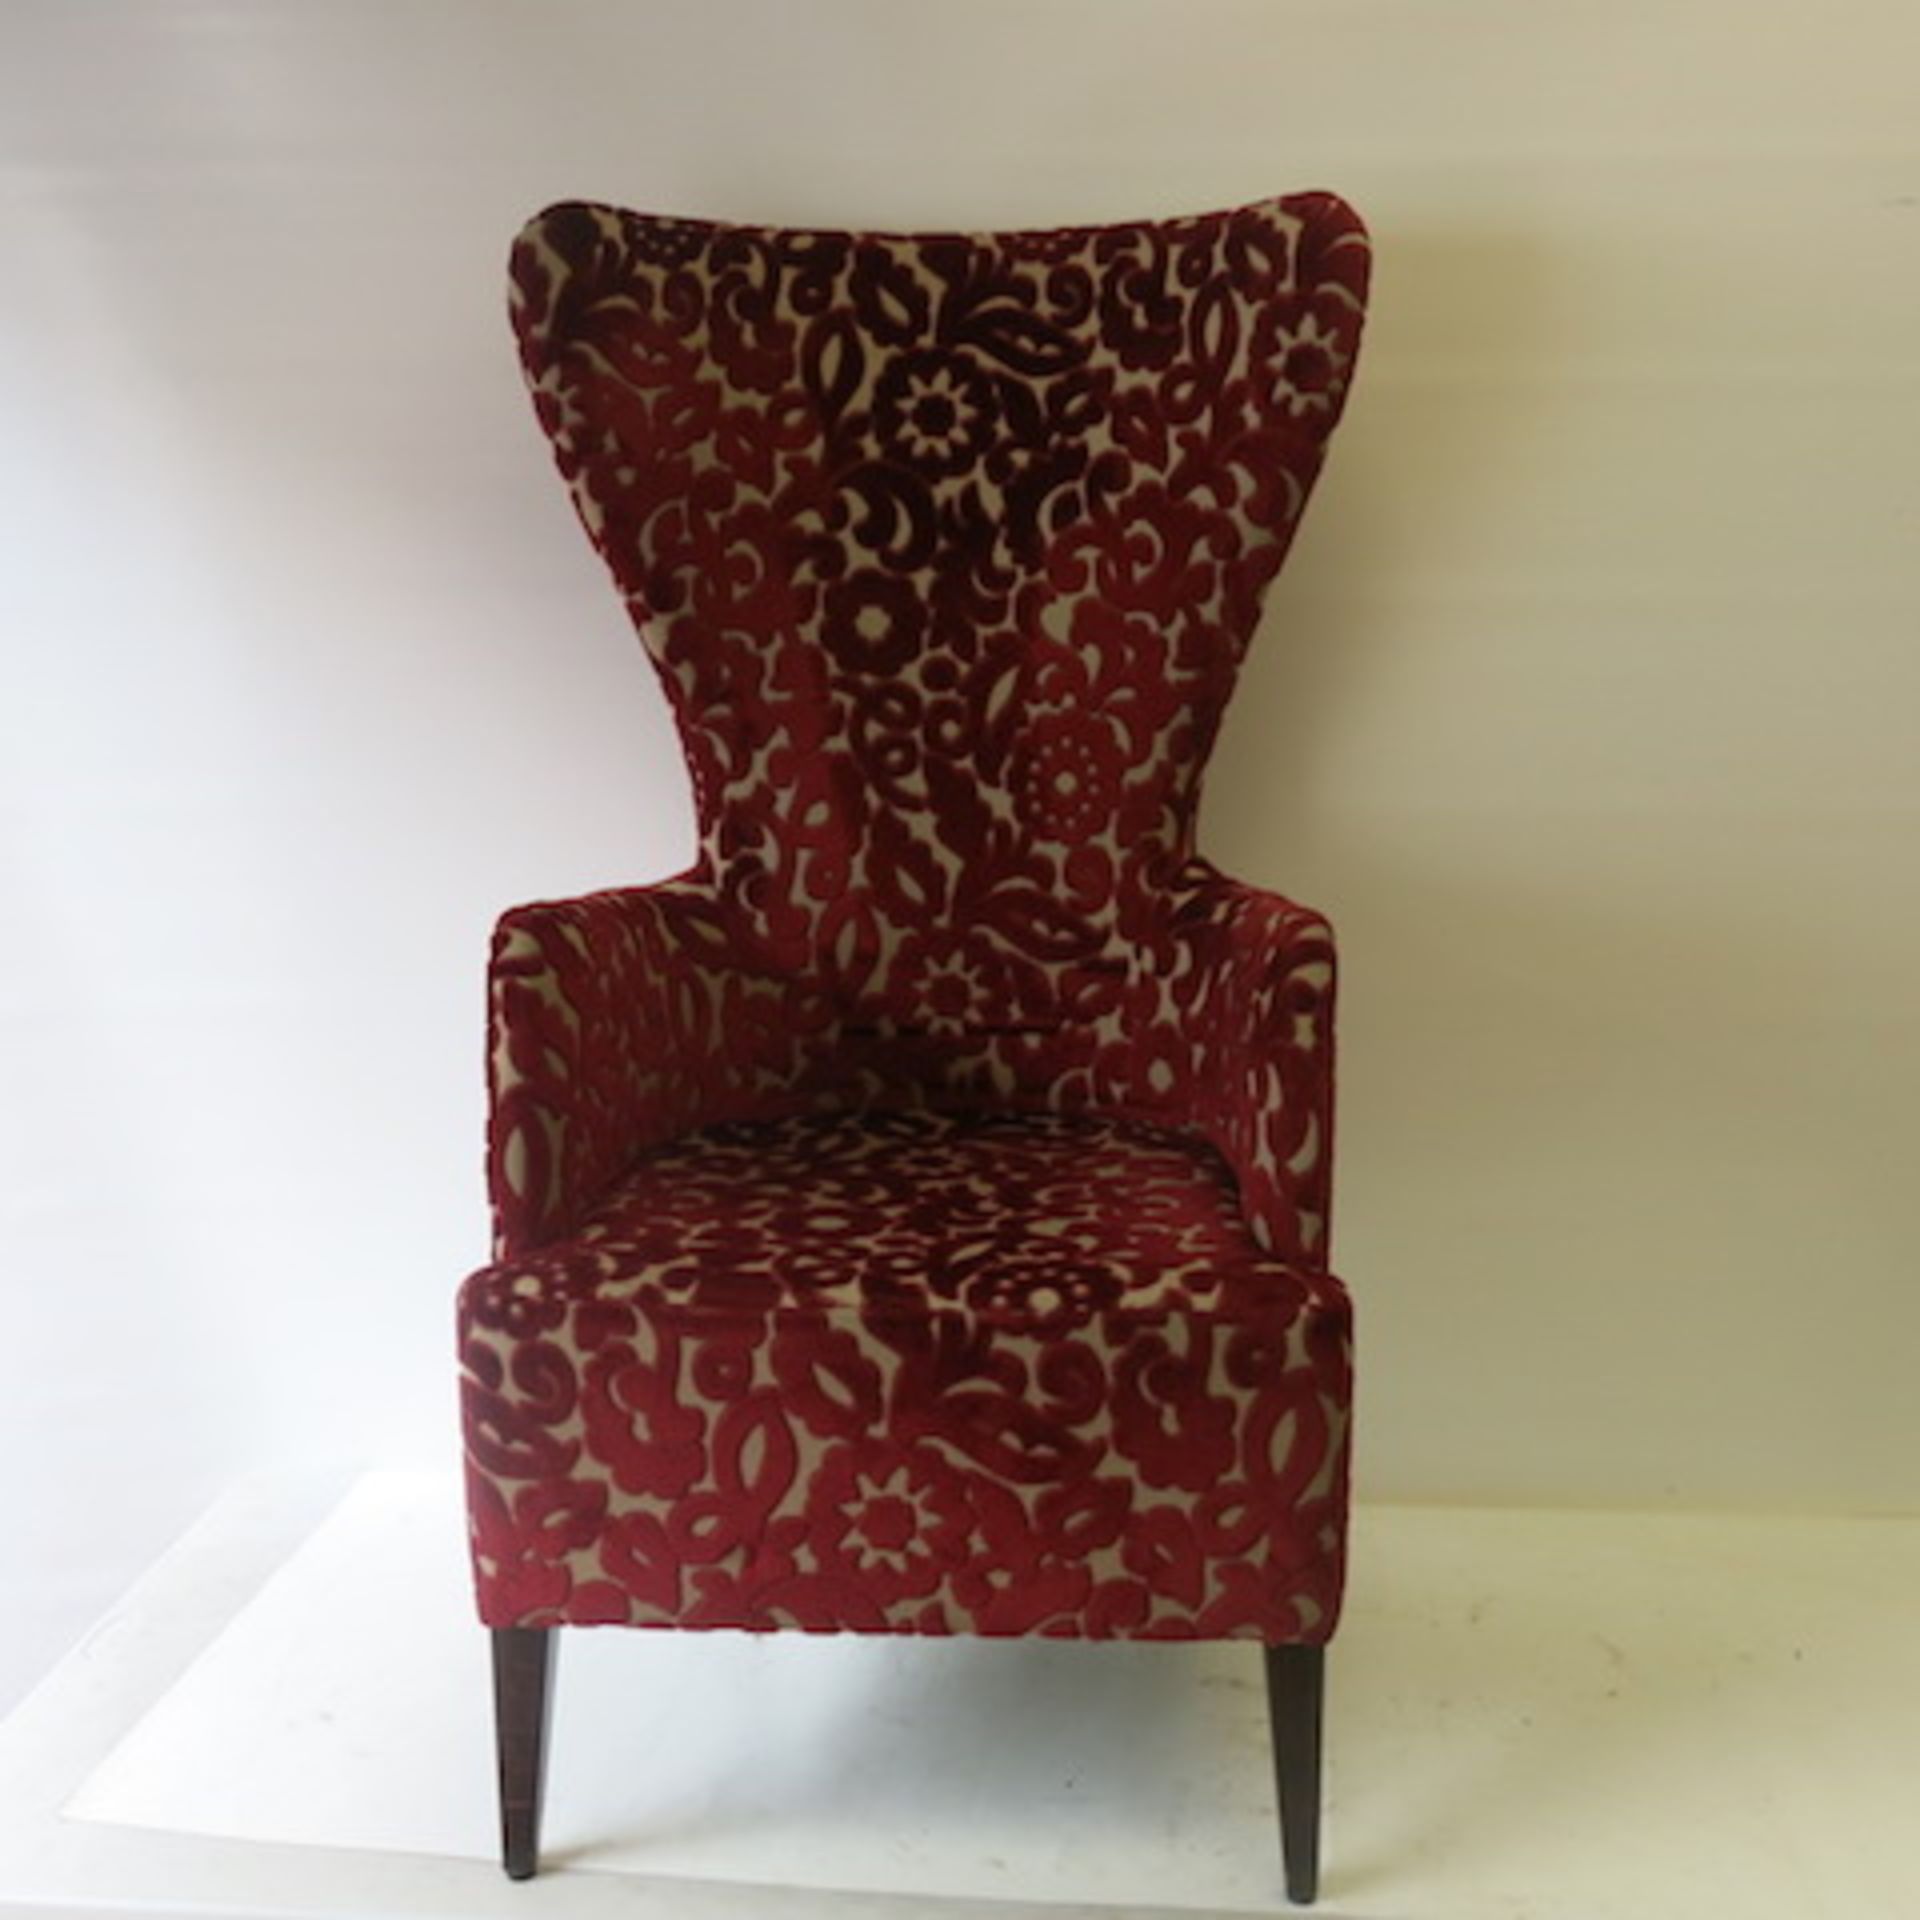 A High Back Wing Armchair with Crushed Velour Pattern in Deep Red & Cream, appears in good condition